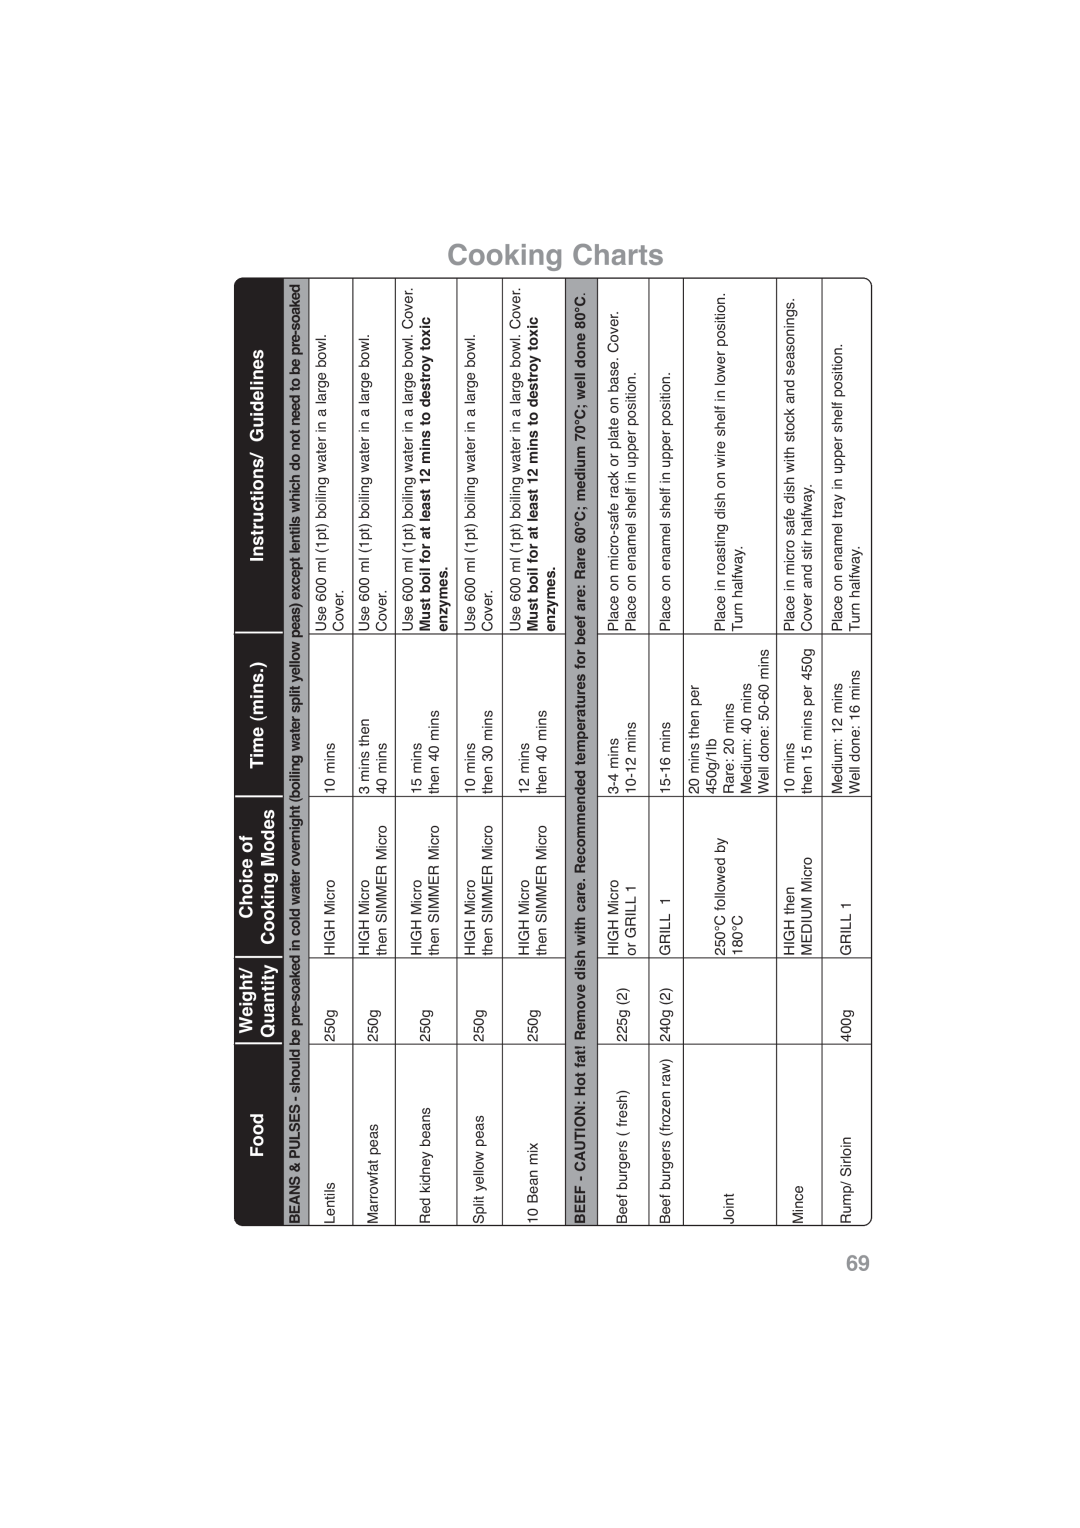 Panasonic NN-CF778S Cooking Charts, Food, Weight, Choice of, Time mins, Instructions/ Guidelines, Quantity, Cooking Modes 